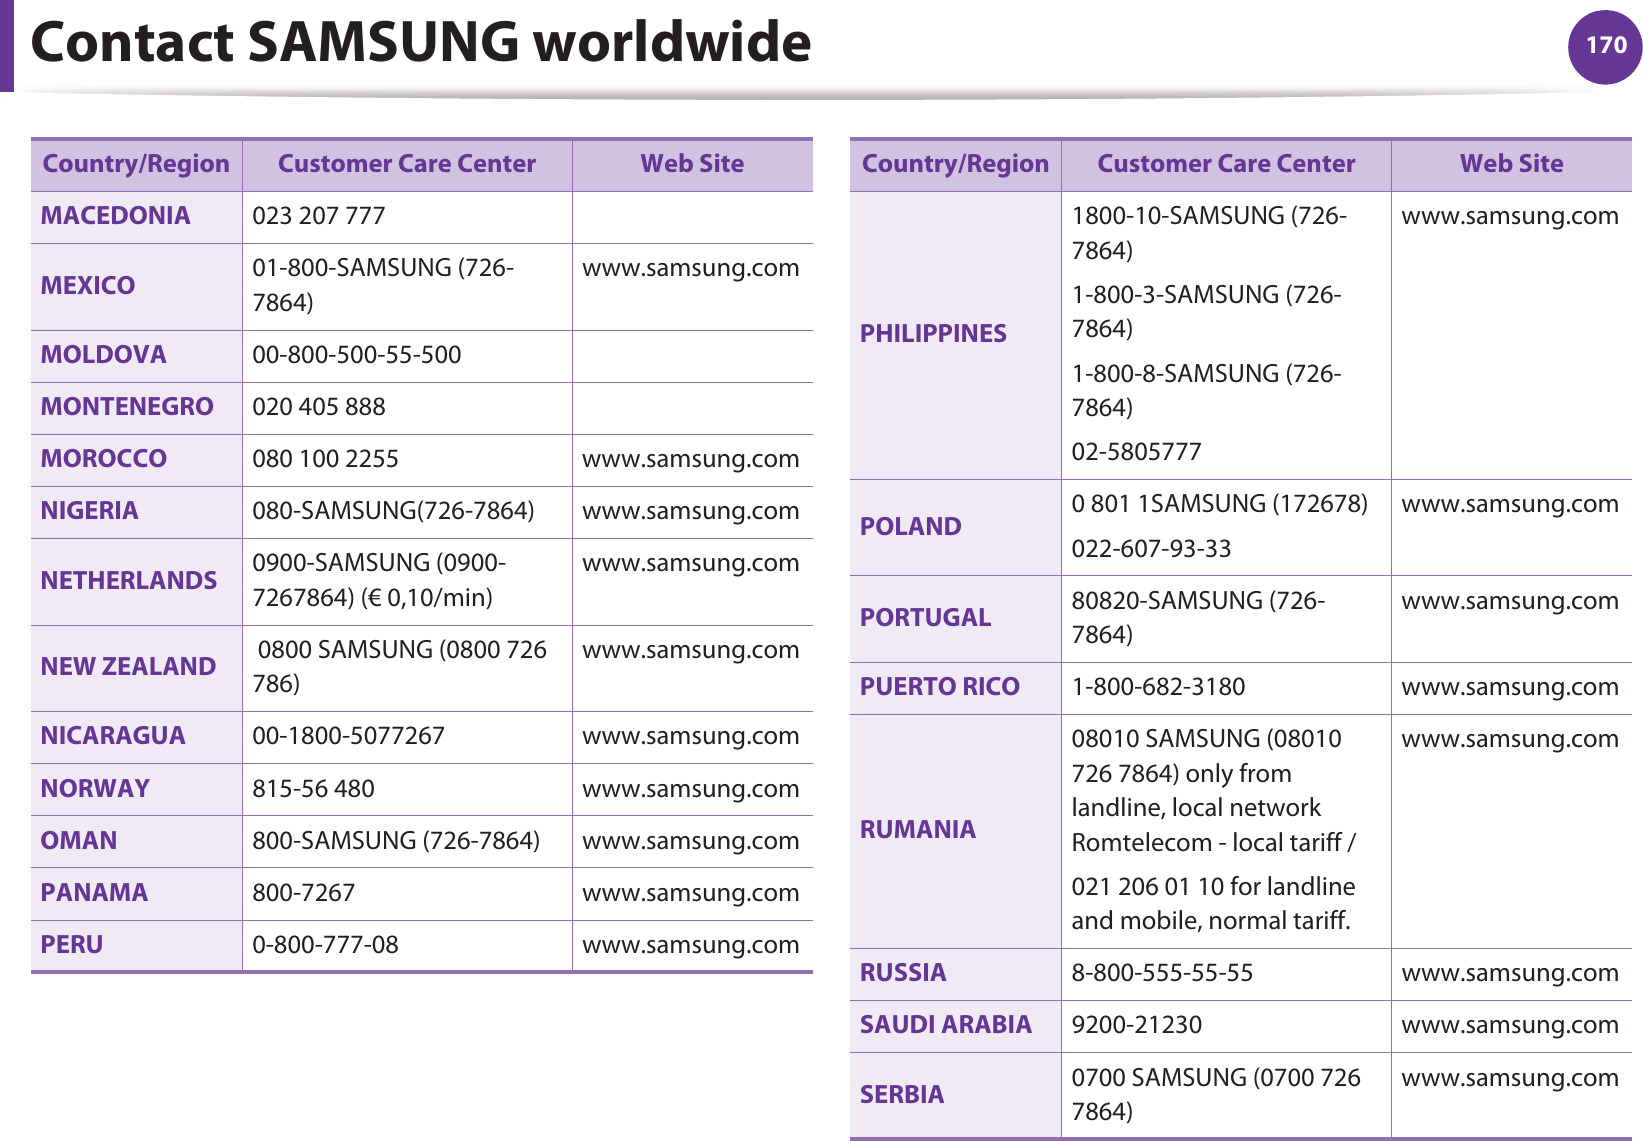 Contact SAMSUNG worldwide 170MACEDONIA 023 207 777MEXICO 01-800-SAMSUNG (726-7864)www.samsung.comMOLDOVA 00-800-500-55-500MONTENEGRO 020 405 888MOROCCO 080 100 2255 www.samsung.comNIGERIA 080-SAMSUNG(726-7864) www.samsung.comNETHERLANDS 0900-SAMSUNG (0900-7267864) (€ 0,10/min)www.samsung.comNEW ZEALAND  0800 SAMSUNG (0800 726 786)www.samsung.comNICARAGUA 00-1800-5077267 www.samsung.comNORWAY 815-56 480 www.samsung.comOMAN 800-SAMSUNG (726-7864) www.samsung.comPANAMA 800-7267 www.samsung.comPERU 0-800-777-08 www.samsung.comCountry/Region Customer Care Center  Web SitePHILIPPINES1800-10-SAMSUNG (726-7864)1-800-3-SAMSUNG (726-7864)1-800-8-SAMSUNG (726-7864)02-5805777www.samsung.comPOLAND 0 801 1SAMSUNG (172678)022-607-93-33www.samsung.comPORTUGAL 80820-SAMSUNG (726-7864)www.samsung.comPUERTO RICO 1-800-682-3180 www.samsung.comRUMANIA08010 SAMSUNG (08010 726 7864) only from landline, local network Romtelecom - local tariff /021 206 01 10 for landline and mobile, normal tariff.www.samsung.comRUSSIA 8-800-555-55-55 www.samsung.comSAUDI ARABIA 9200-21230 www.samsung.comSERBIA 0700 SAMSUNG (0700 726 7864)www.samsung.comCountry/Region Customer Care Center  Web Site